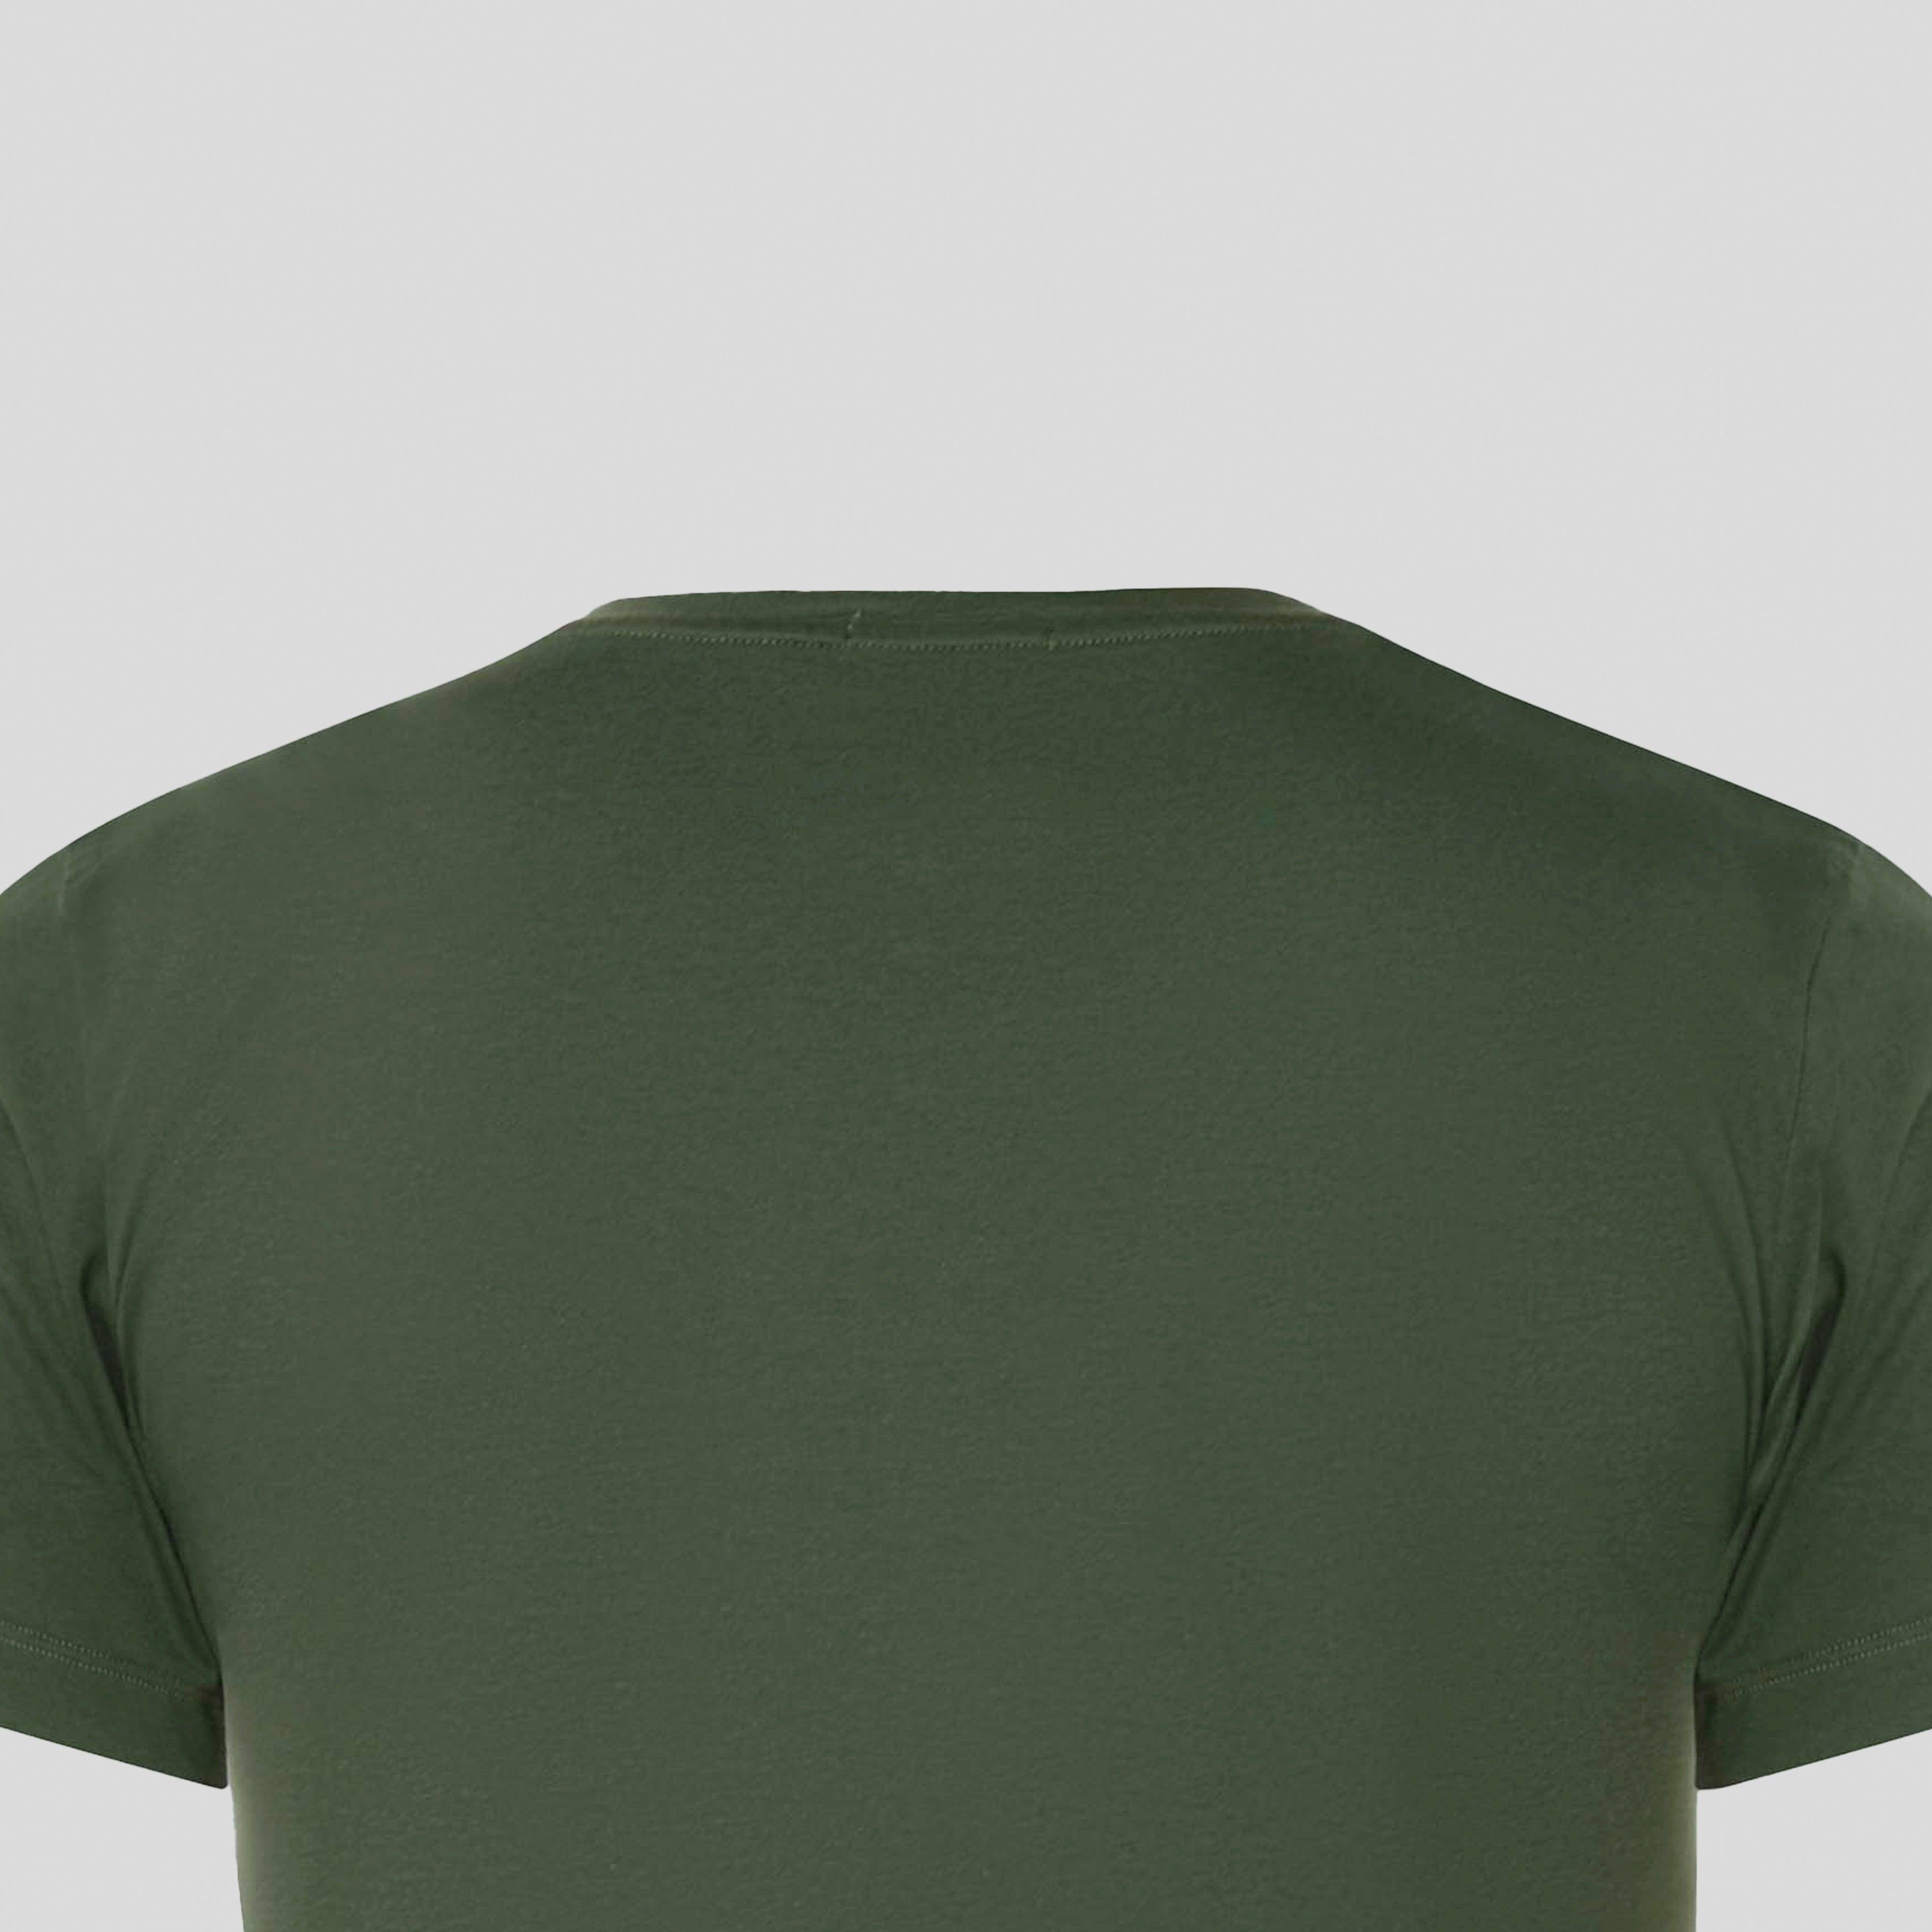 ALONDRA T-SHIRT GREEN | Monastery Couture